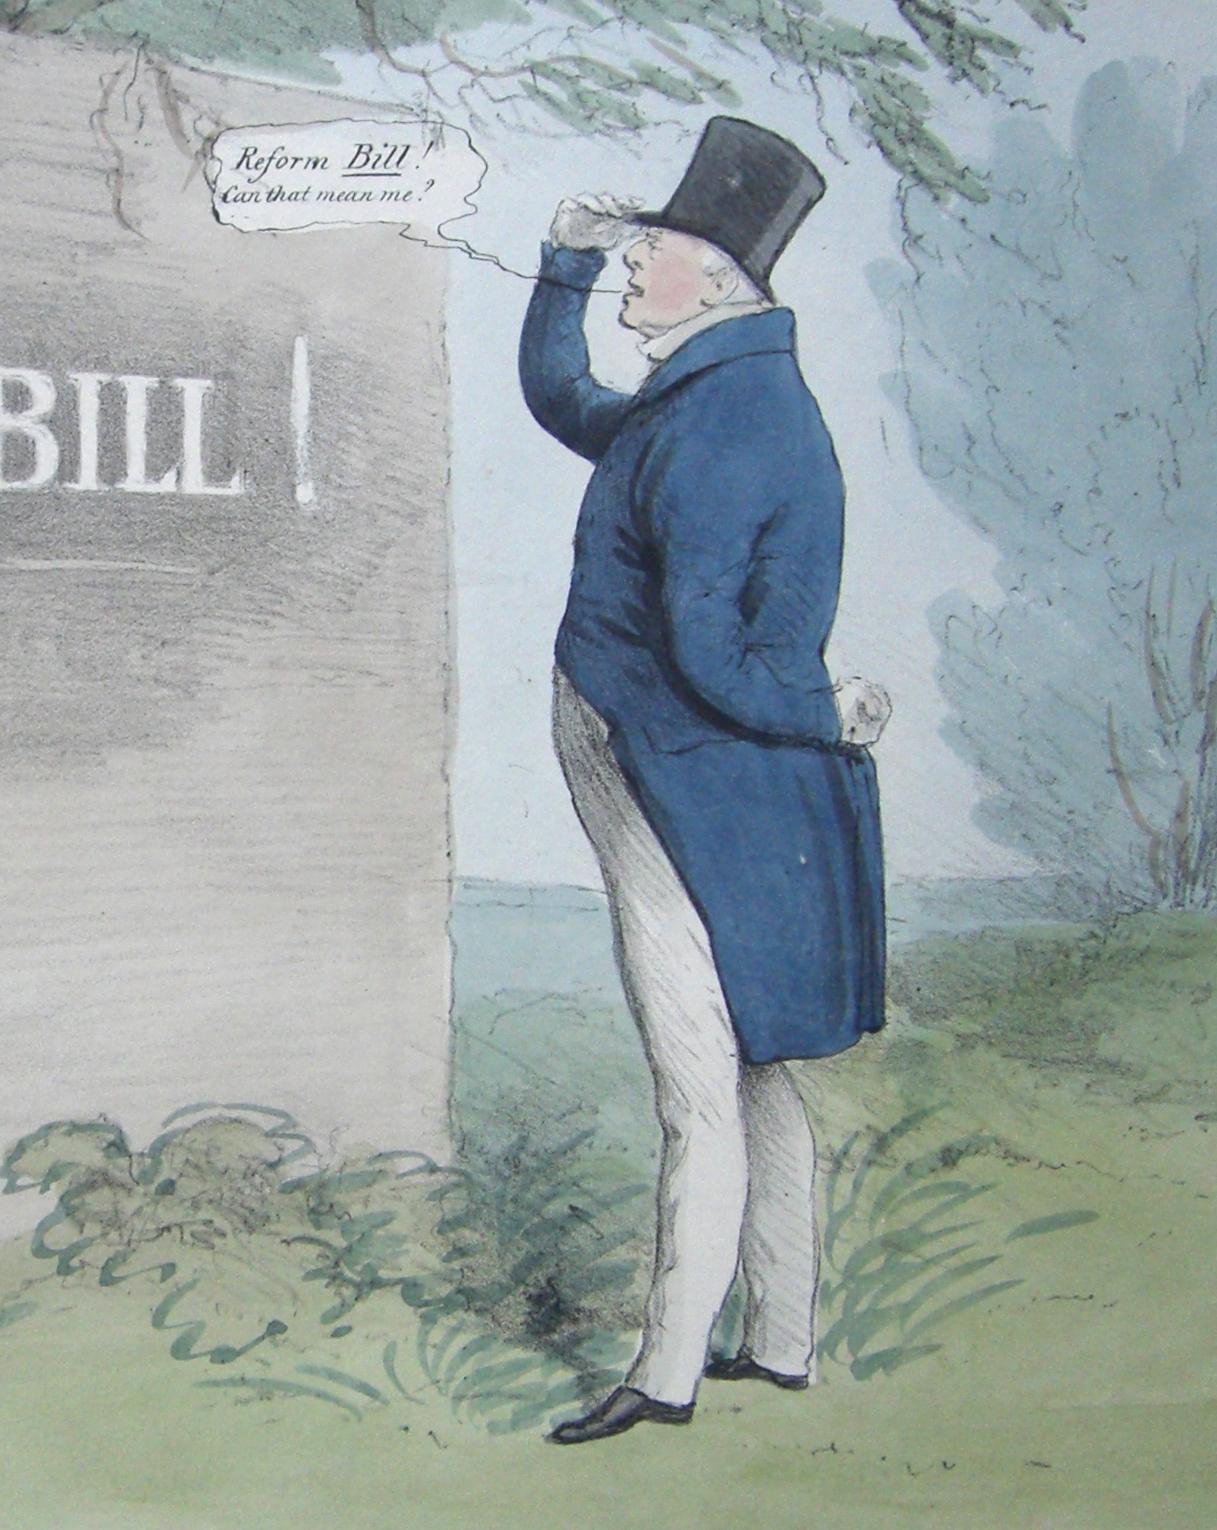 Handwriting Upon the Wall – Reform Bill! - Lithograph by J. Doyle - 1831 - Print by John Doyle